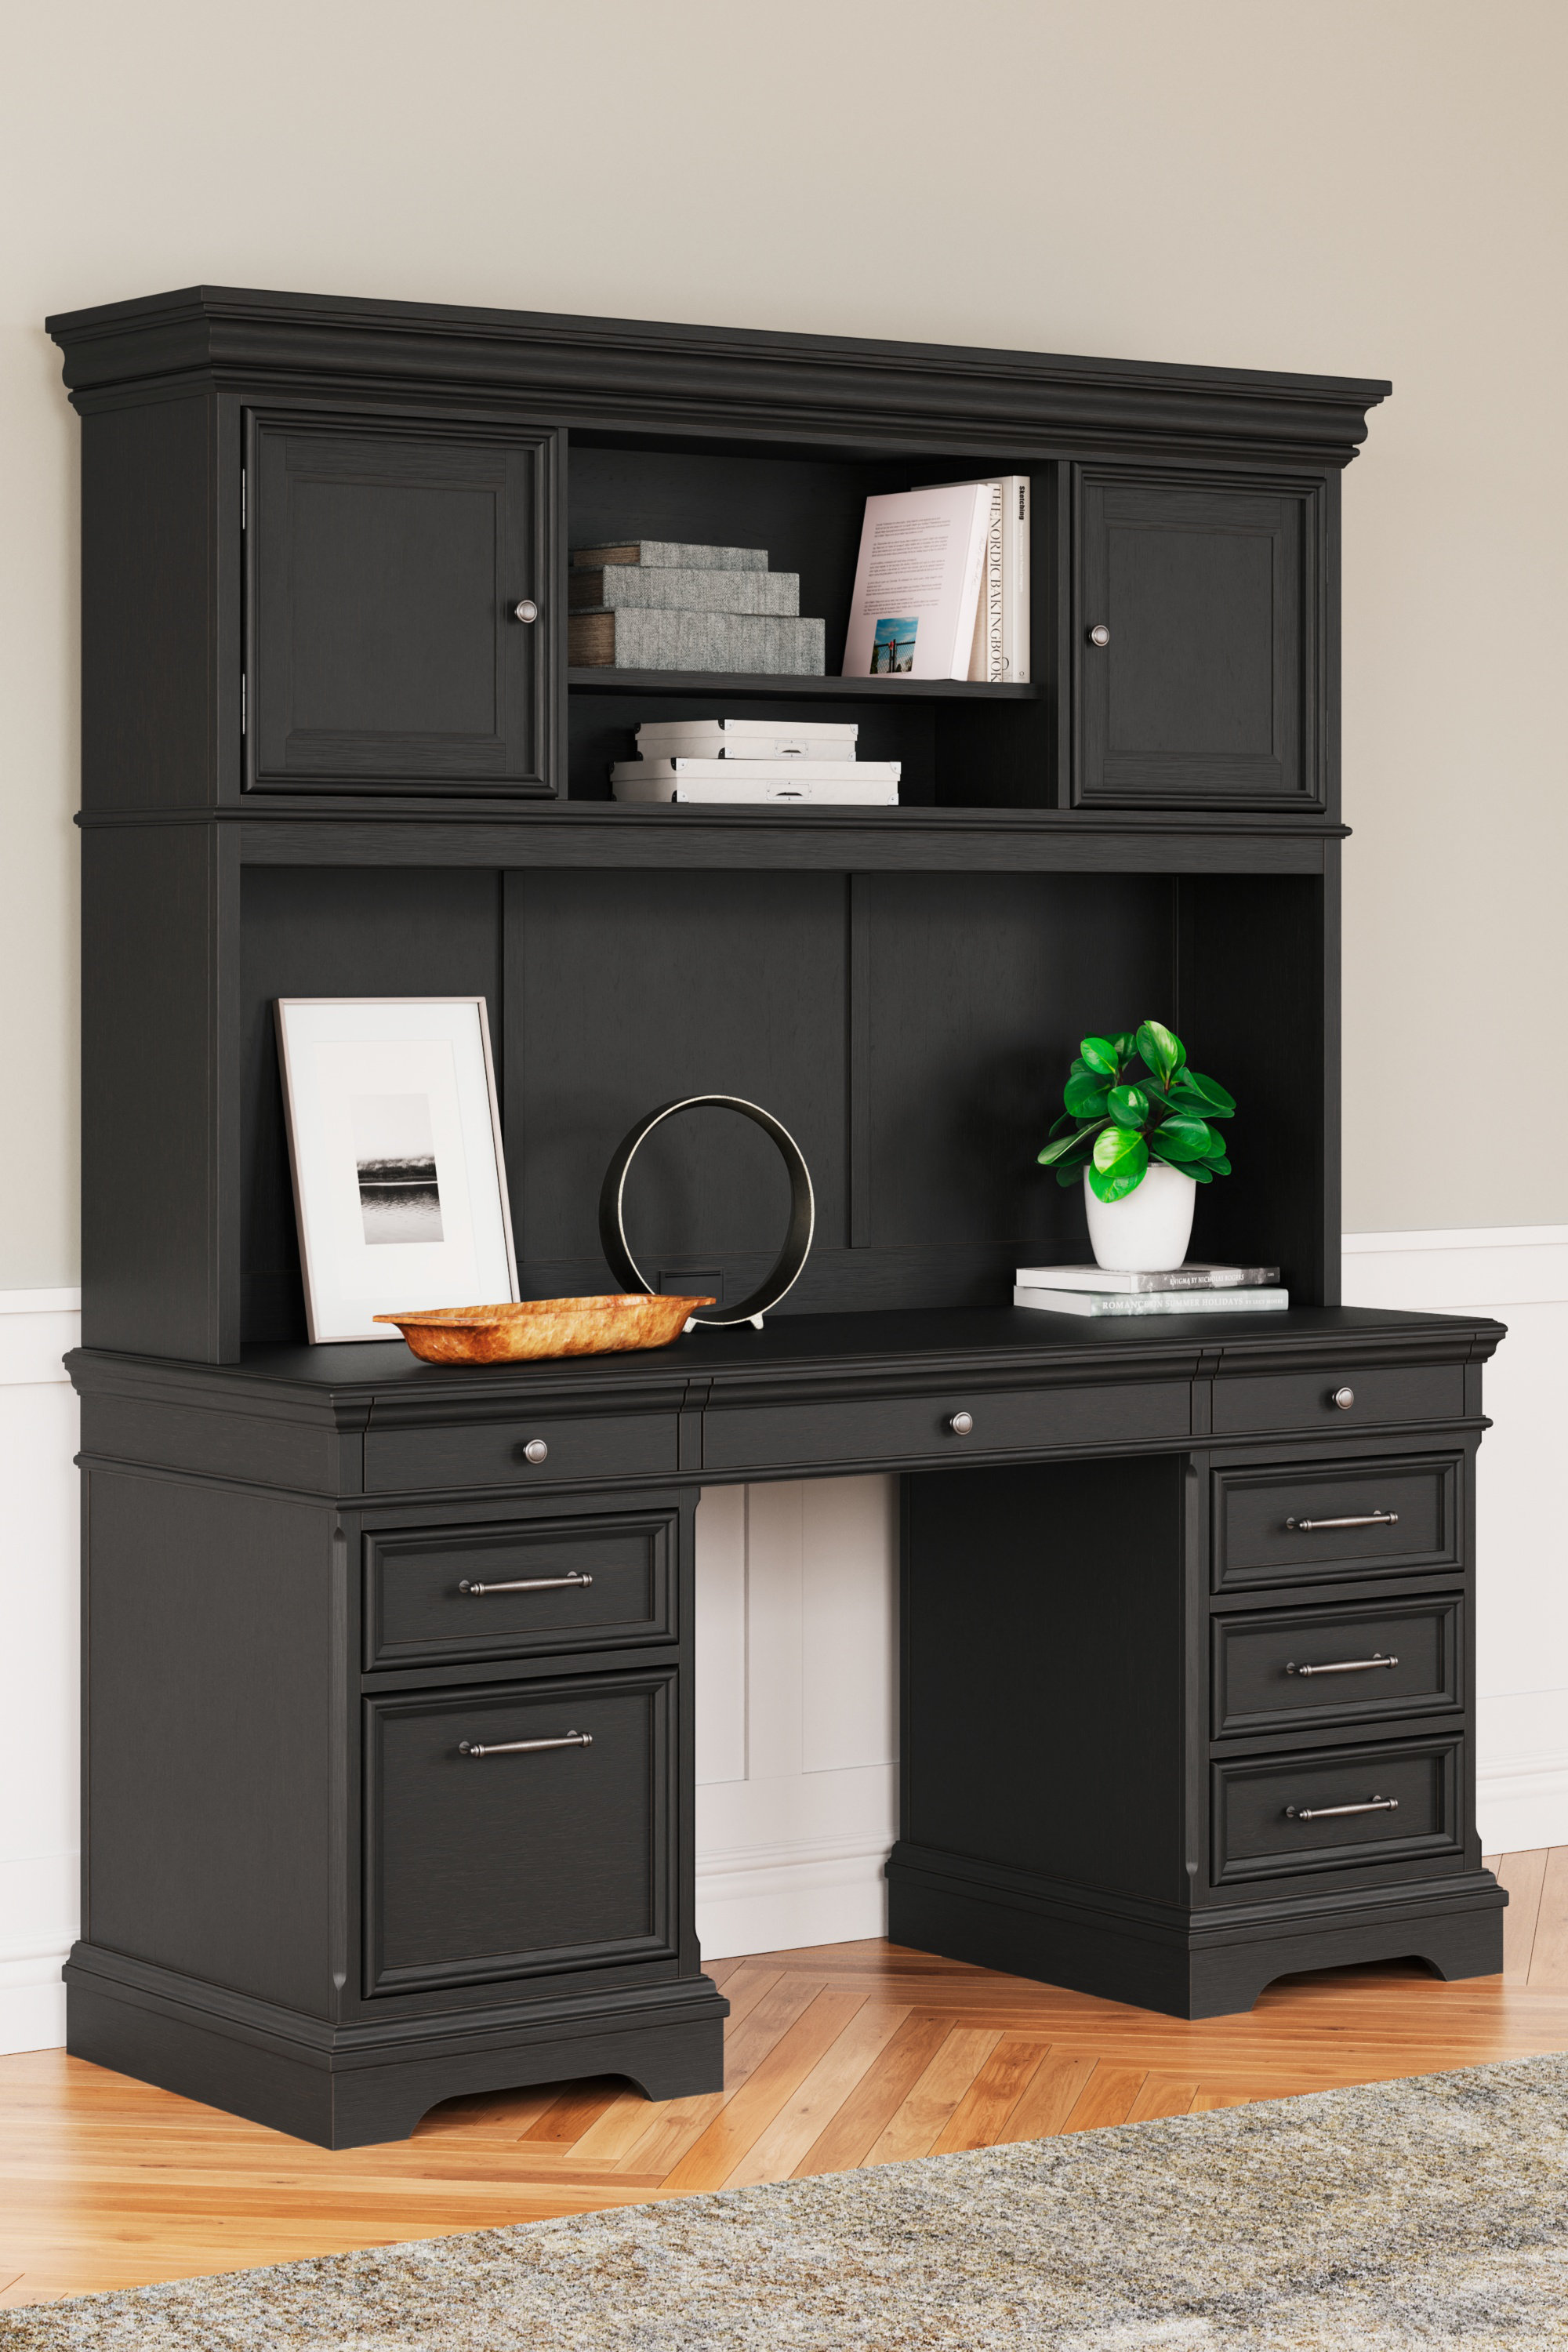 The Janismore Weathered Gray Desk With 2 Bookcase Wall Units is